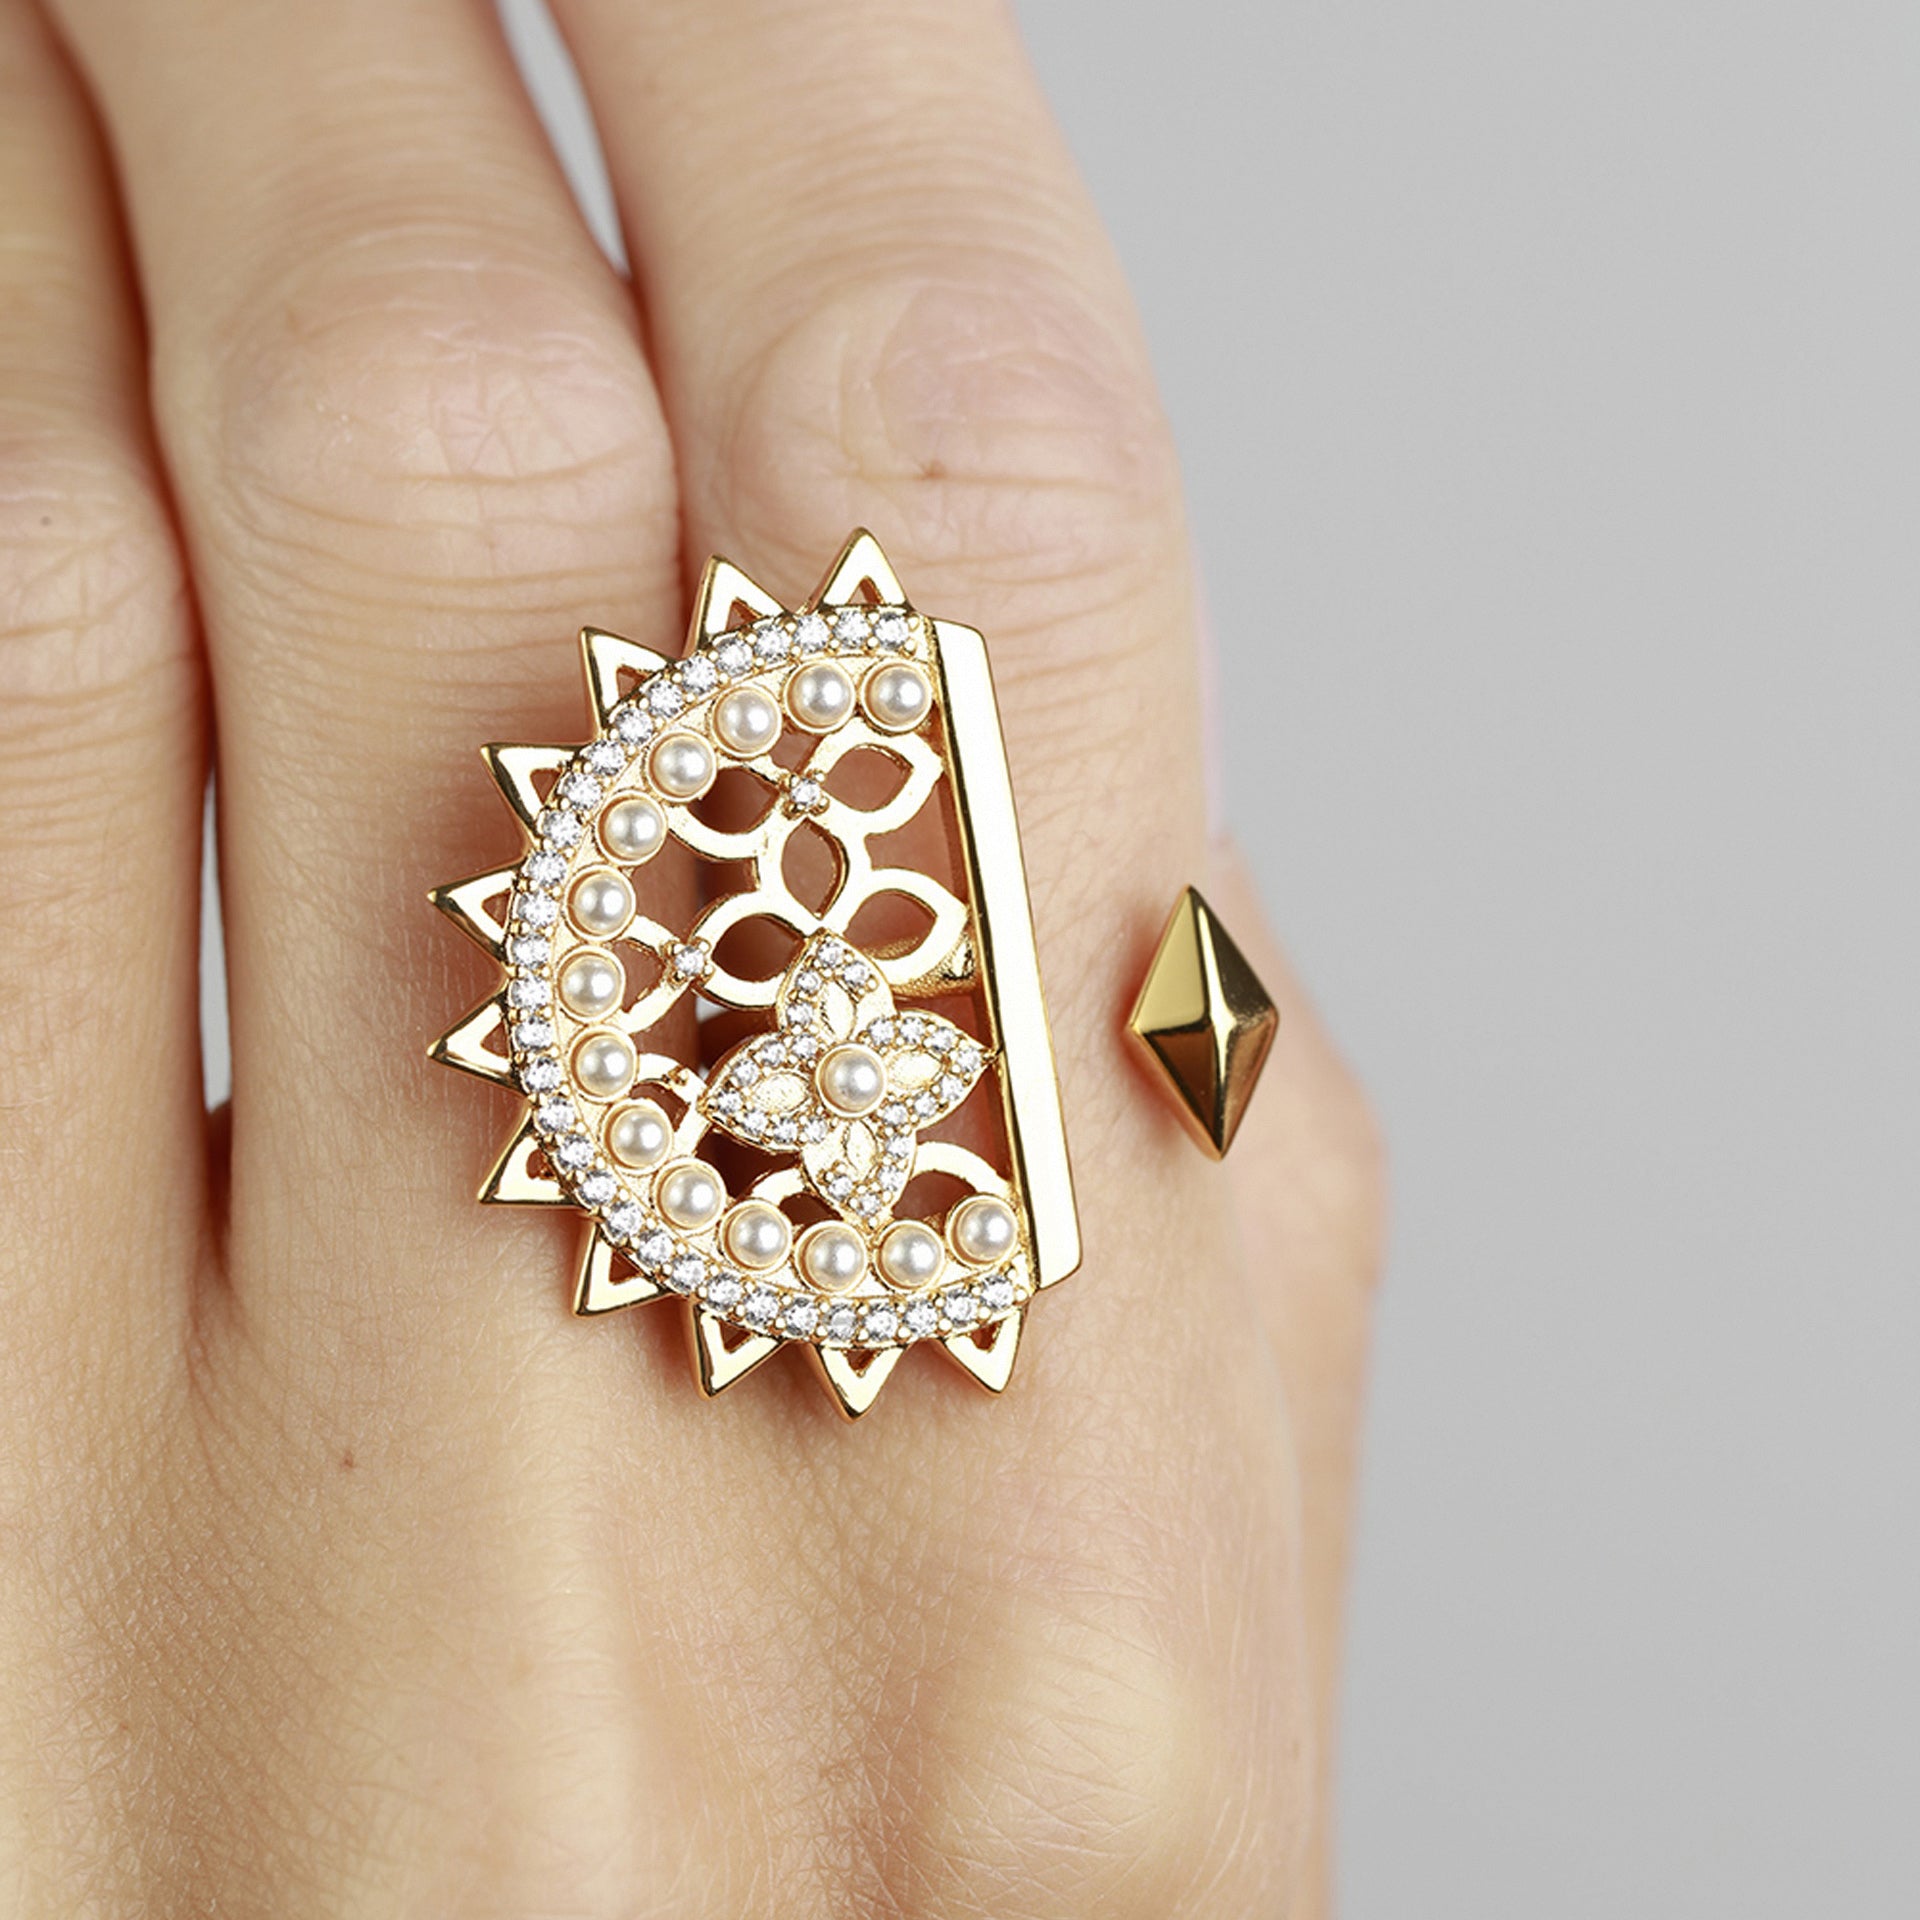 Asayel Gold Ring From Le-Soleil